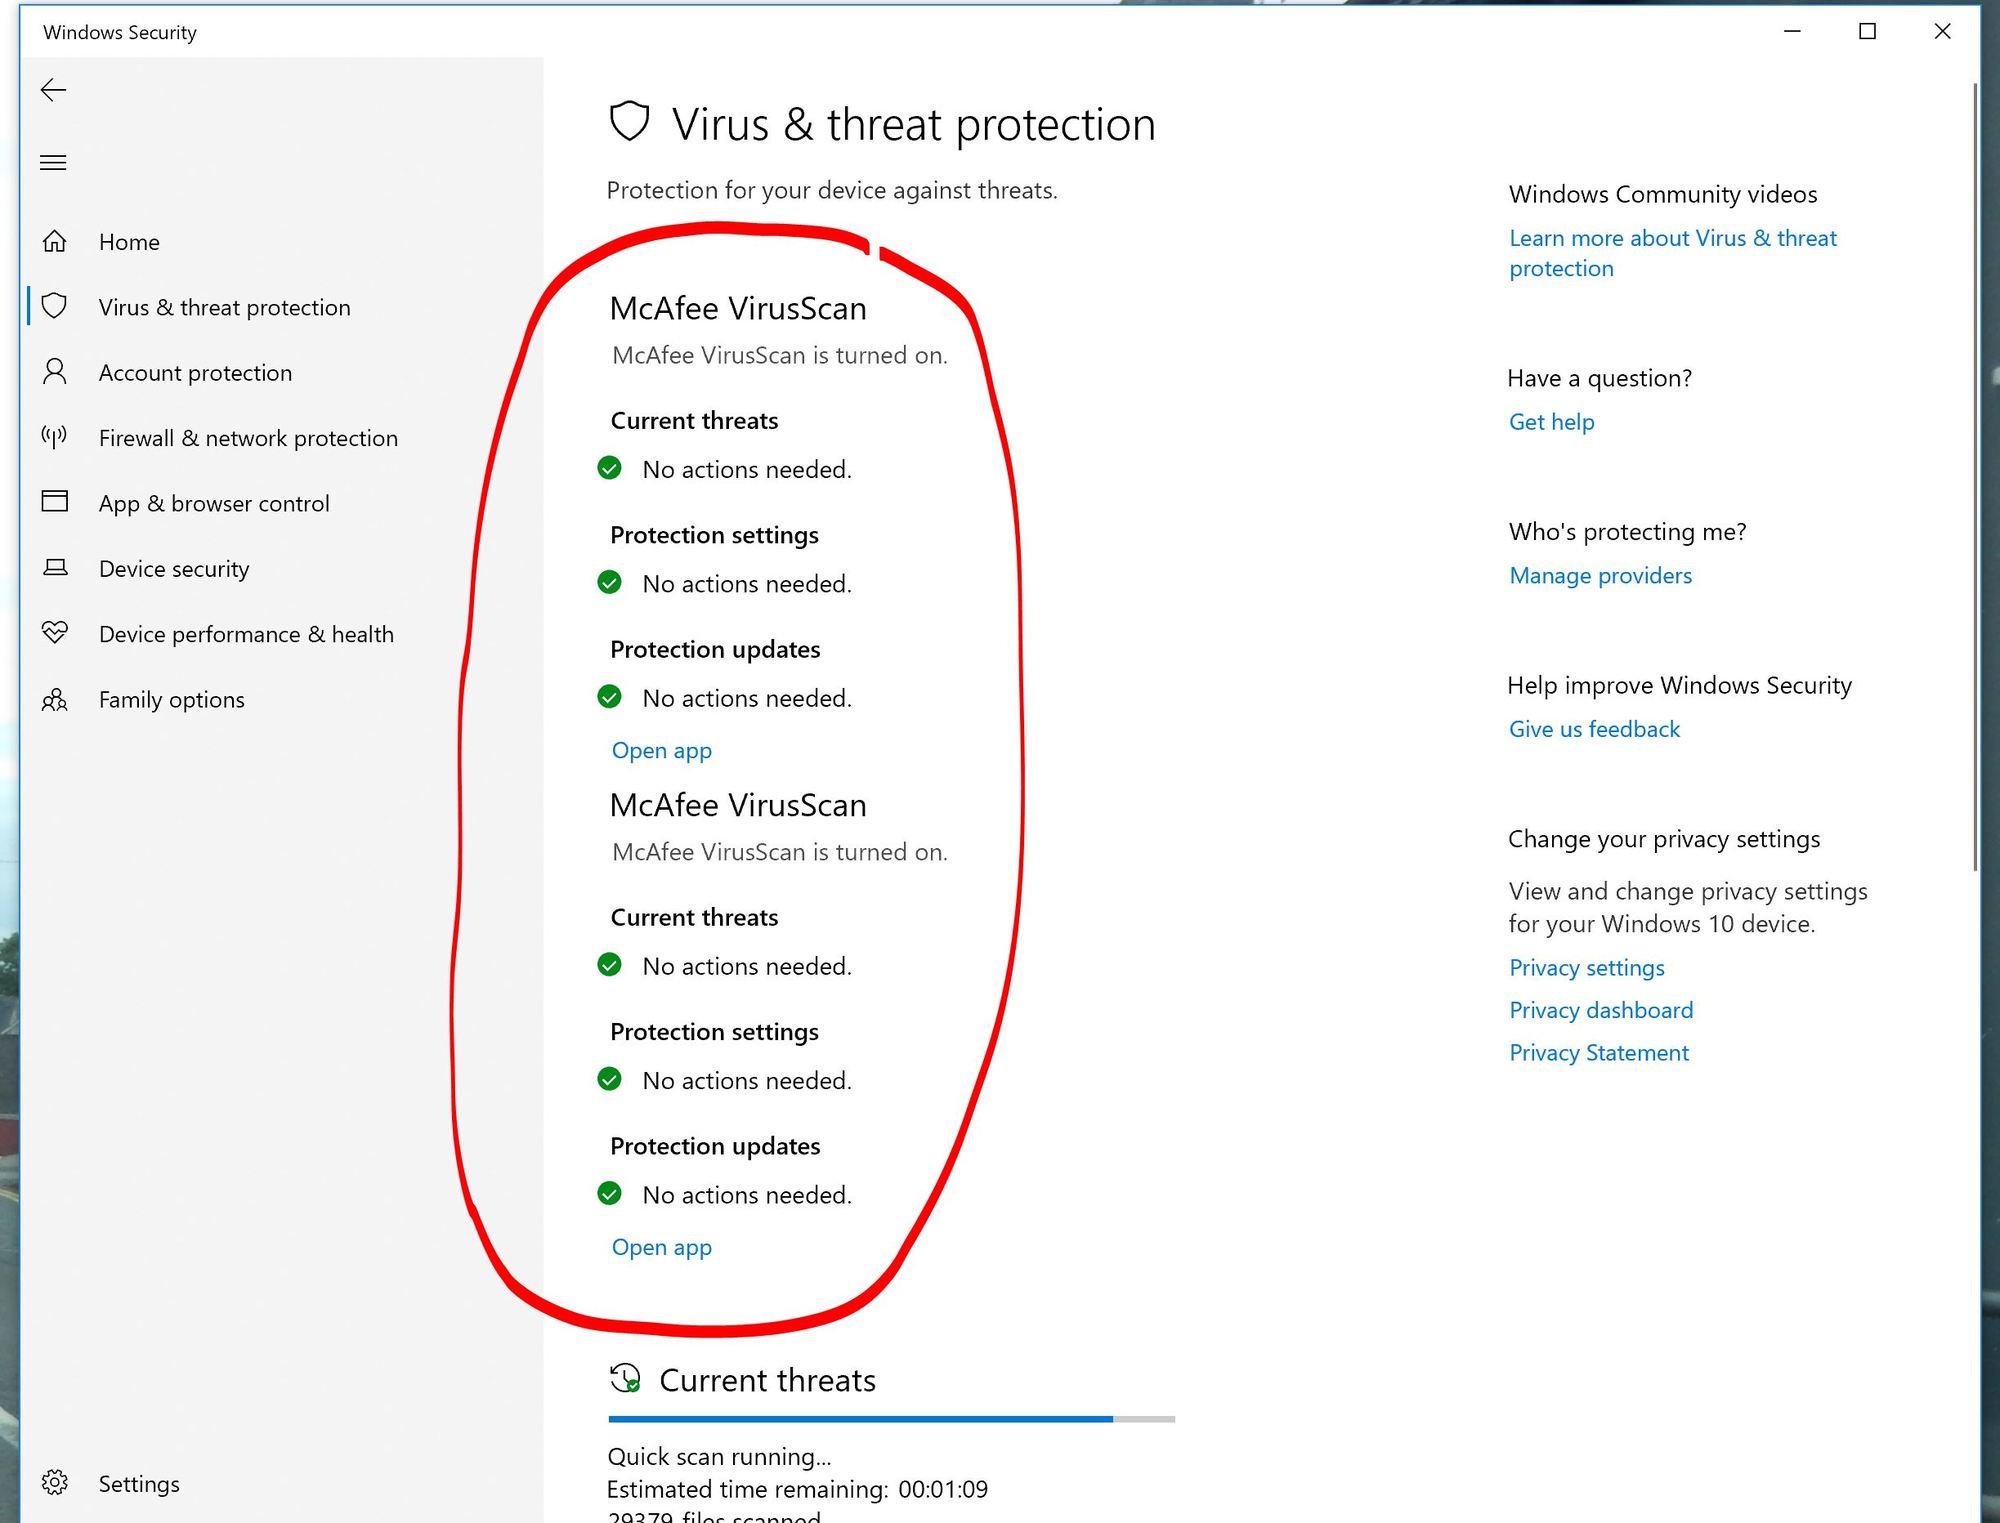 Windows Security - Showing TWO 2 Mcafee Apps in Settings Security since last Windows Update 40651ba2-6a40-43cf-9cd5-013013e29d9a?upload=true.jpg